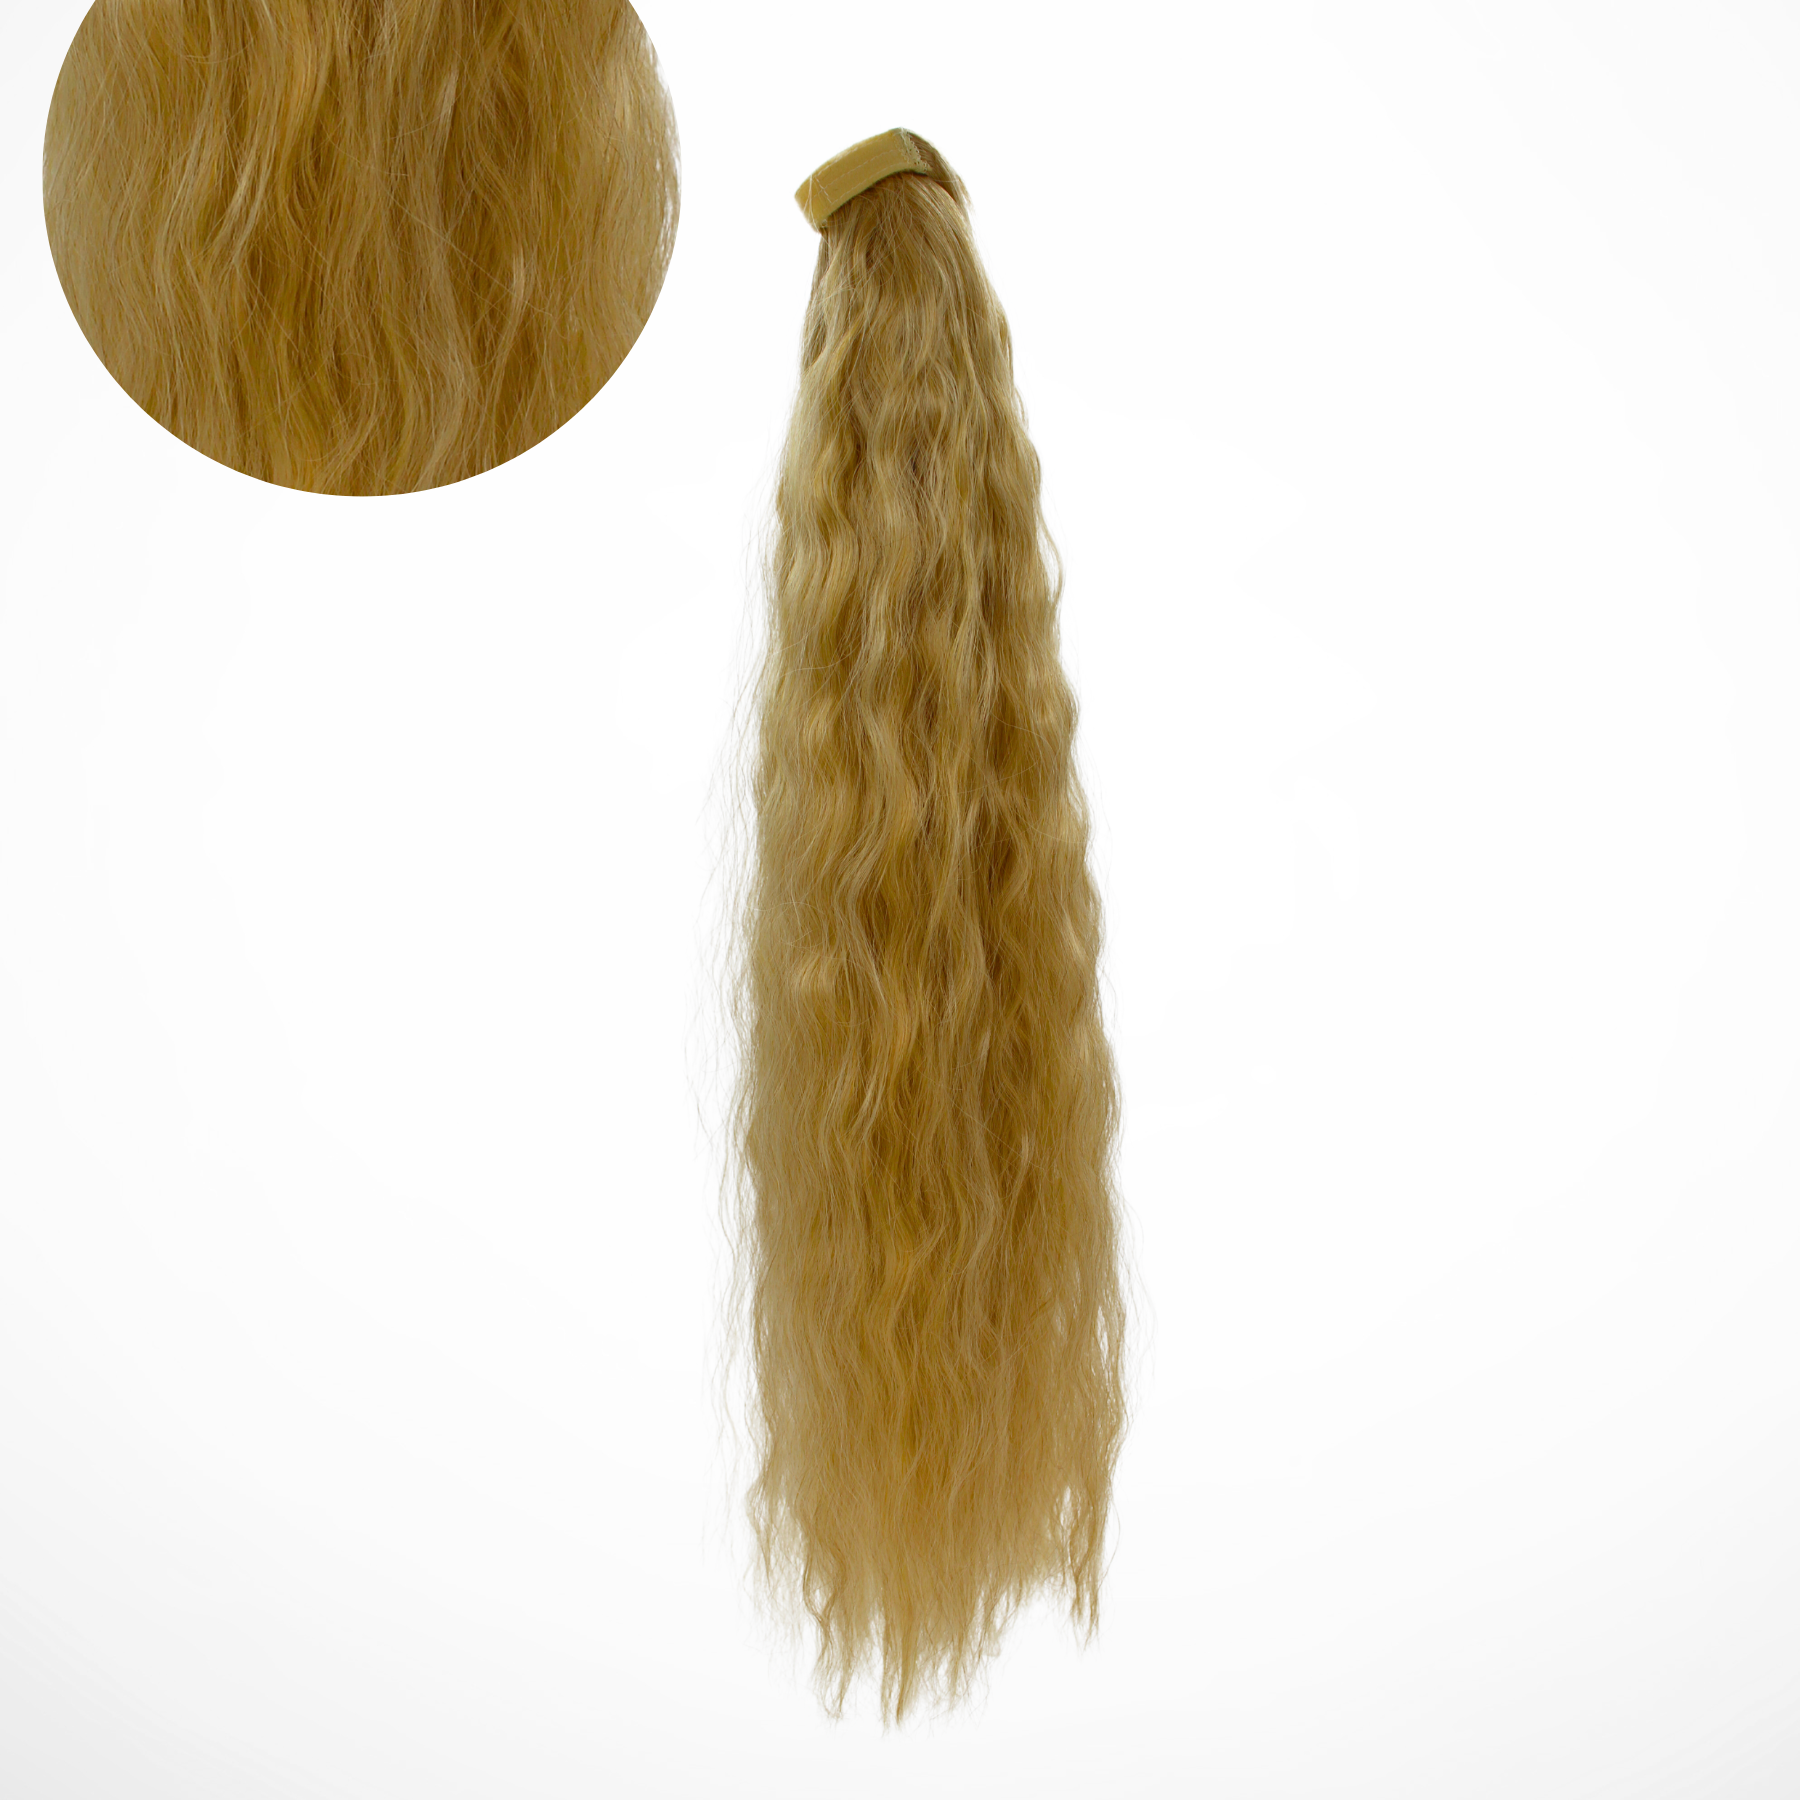 The Rae Tousled Texture Salon-Quality DIY Ponytail Hair Extension